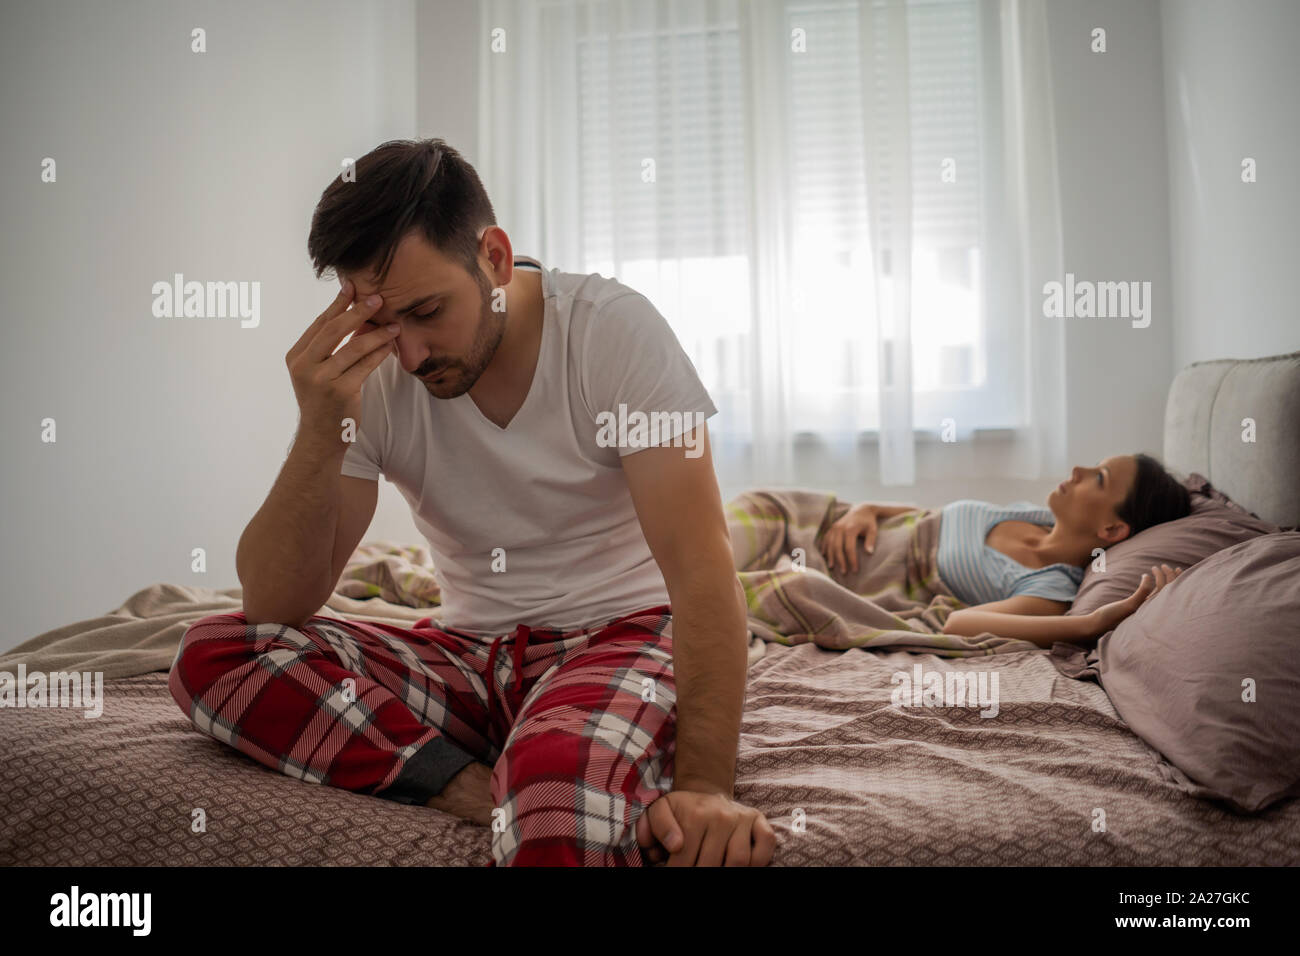 Young man is having insomnia. He wakes up early in the morning. Stock Photo